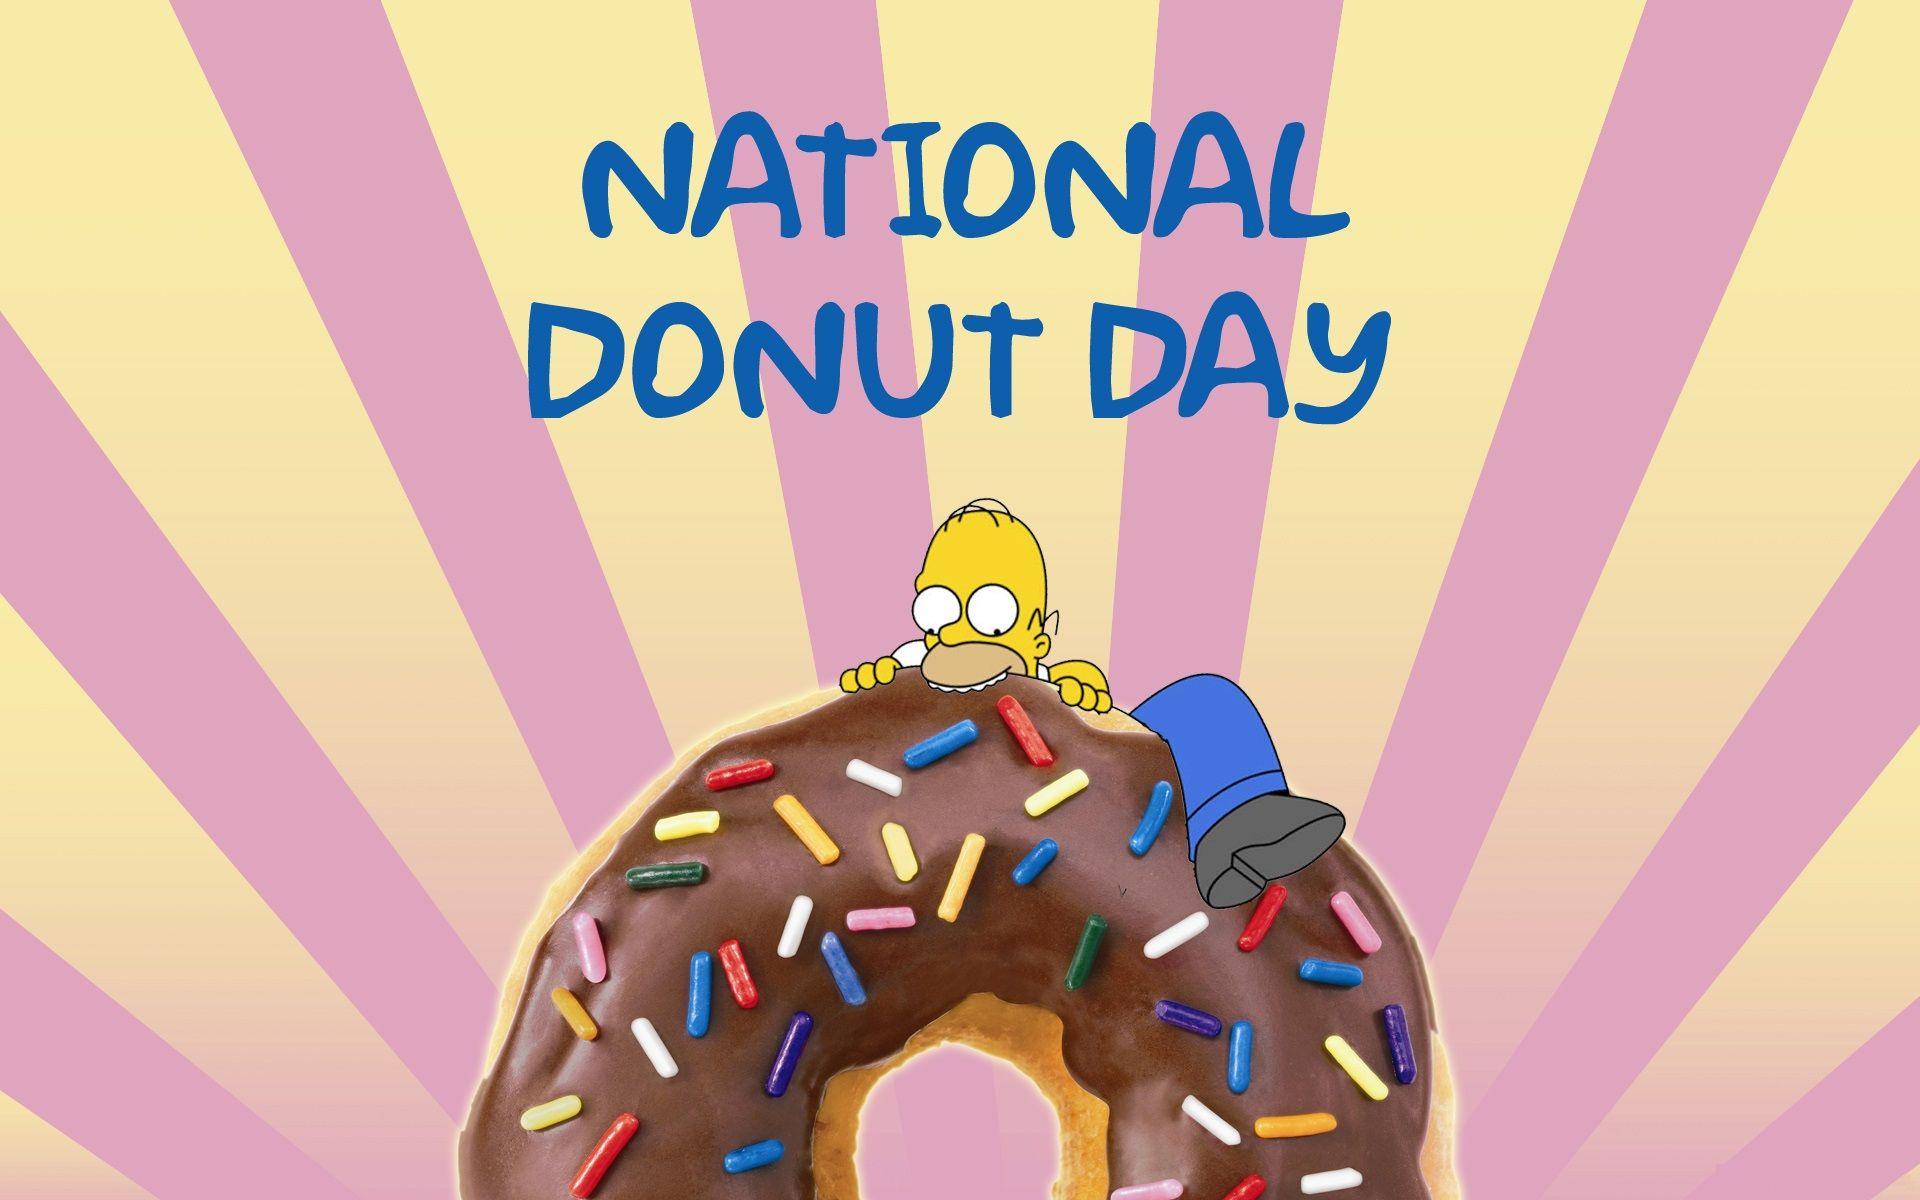 National Donut Day 2013 Wallpaper HD 1080p. General